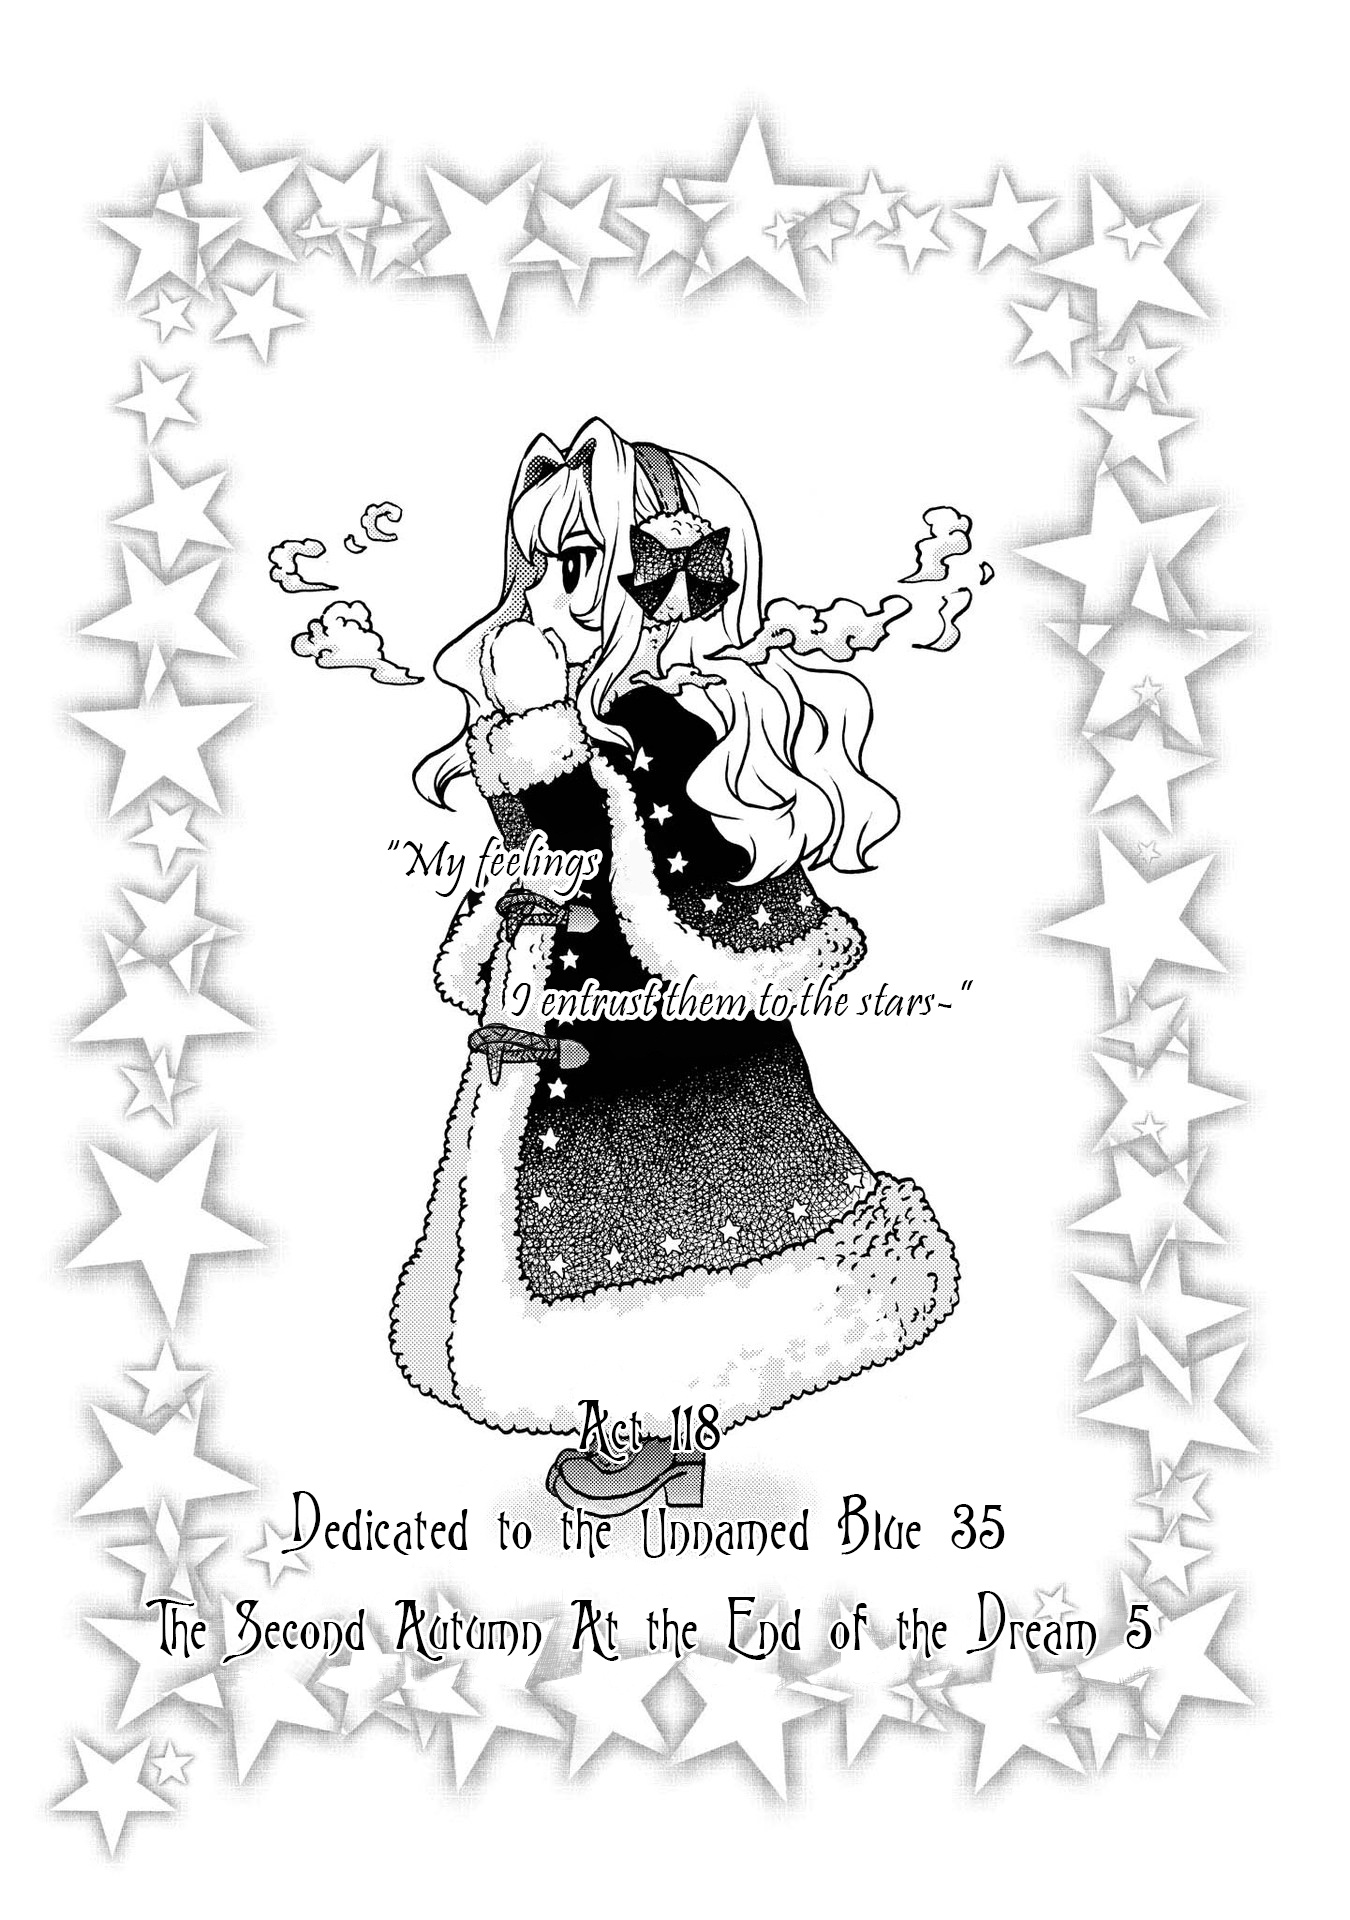 Hatenkou Yuugi Vol.17 Chapter 118: Dedicated To The Unnamed Blue #35 - The Second Autumn At The End Of The Dream #5 - Picture 1